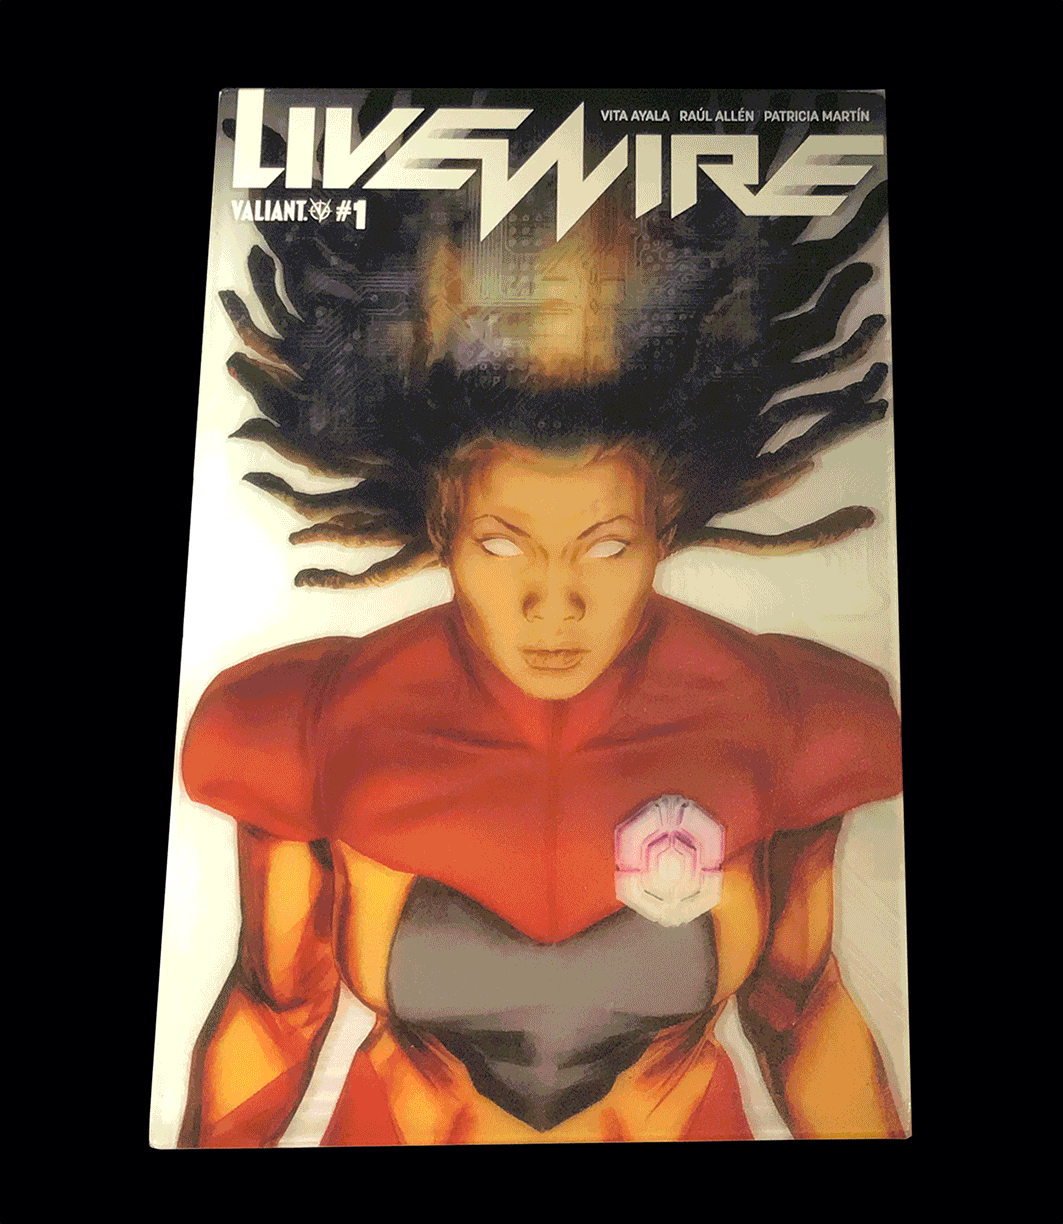 Preview: Livewire #1 by Ayala, Allen, & Martin (Valiant)